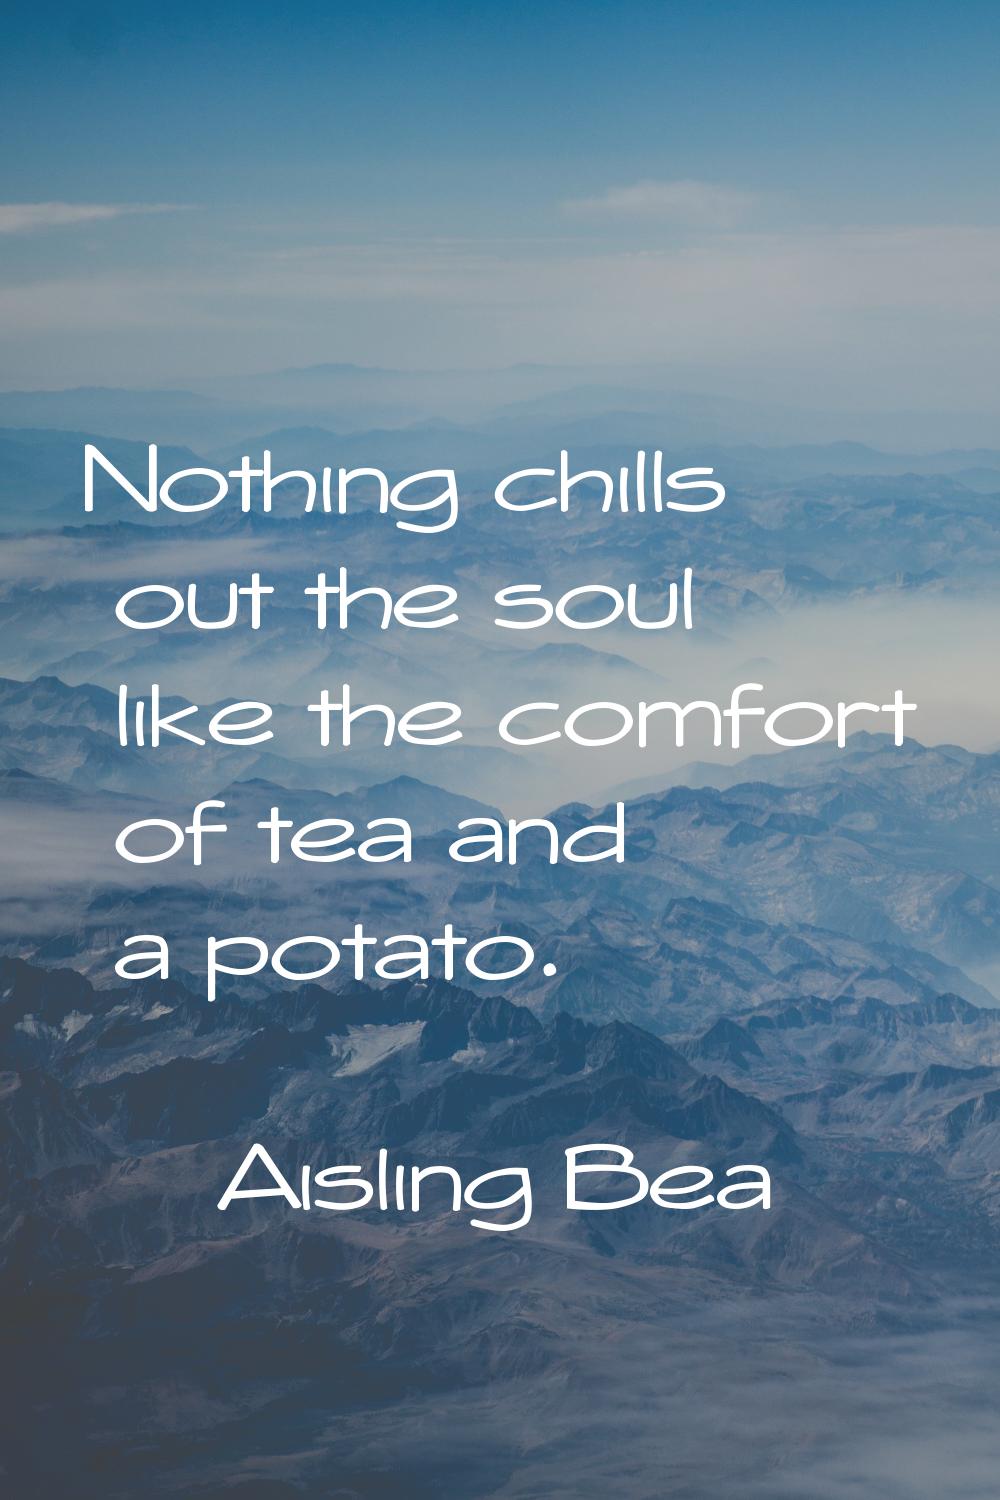 Nothing chills out the soul like the comfort of tea and a potato.